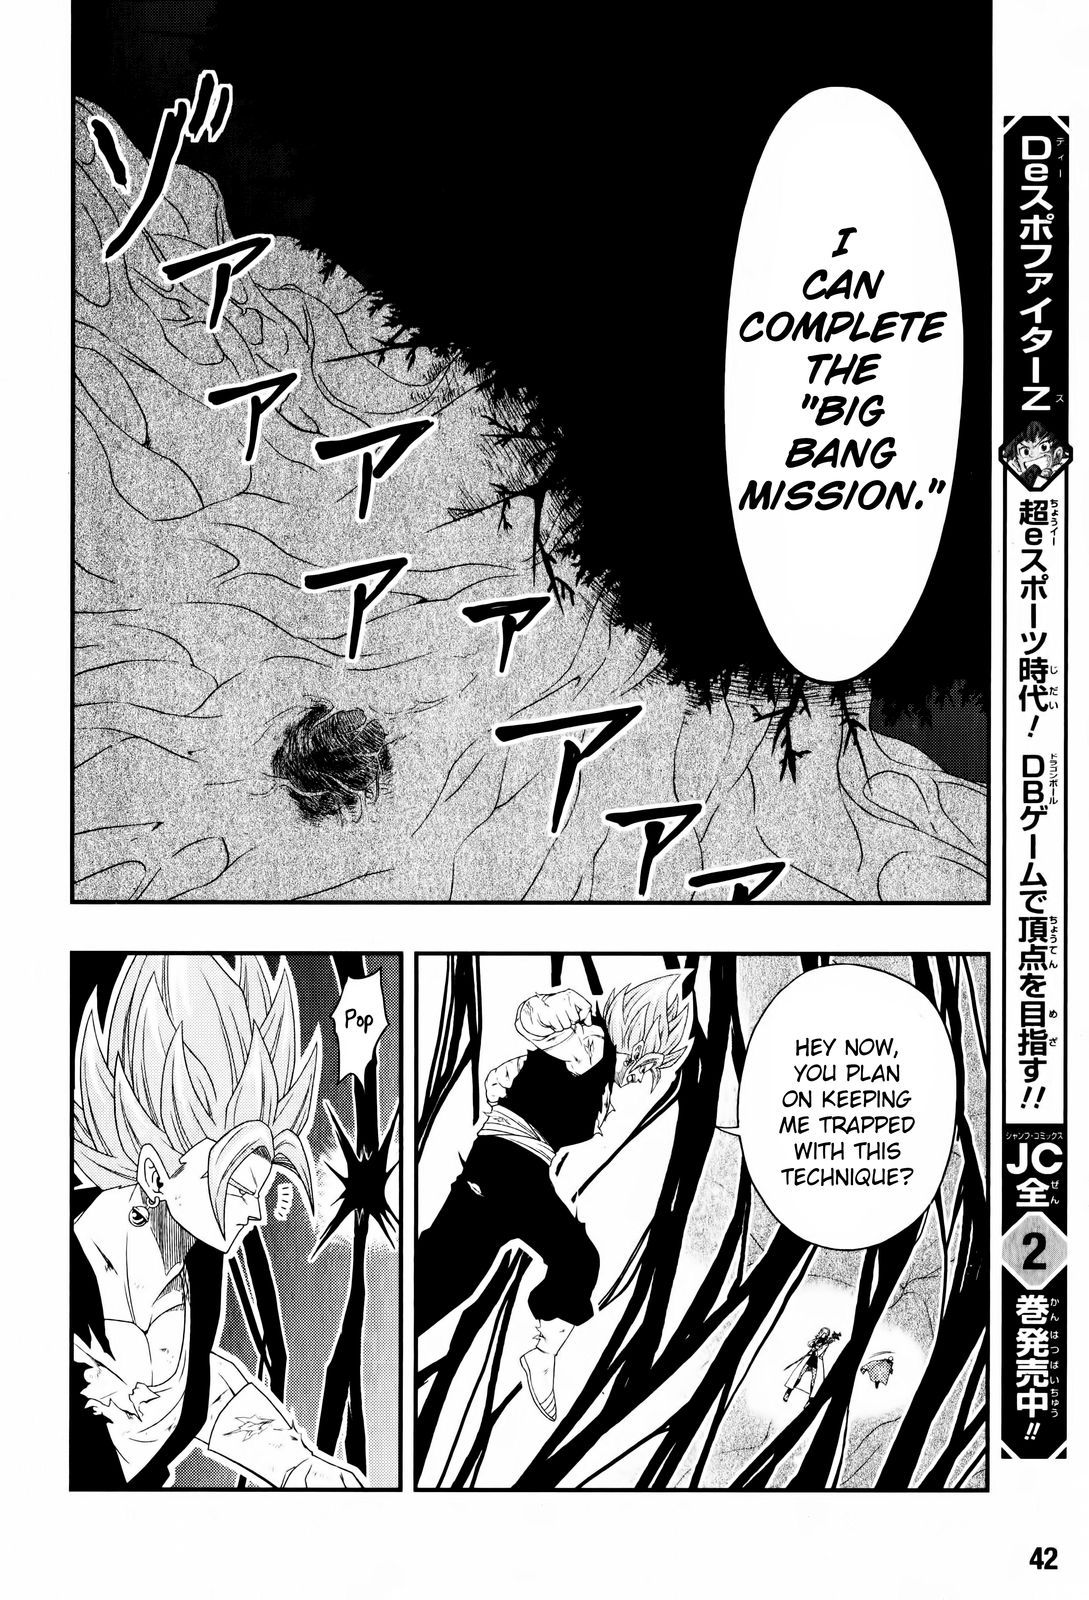 Dragon Grievous on X: Here are some panels from Super Dragon Ball Heroes  Big Bang Mission Manga Chapter 13. #DragonBall #DragonBallZ #DragonBallGT  #DagonBallSuper #DragonBallHeroes #SuperDragonBallHeroes   / X